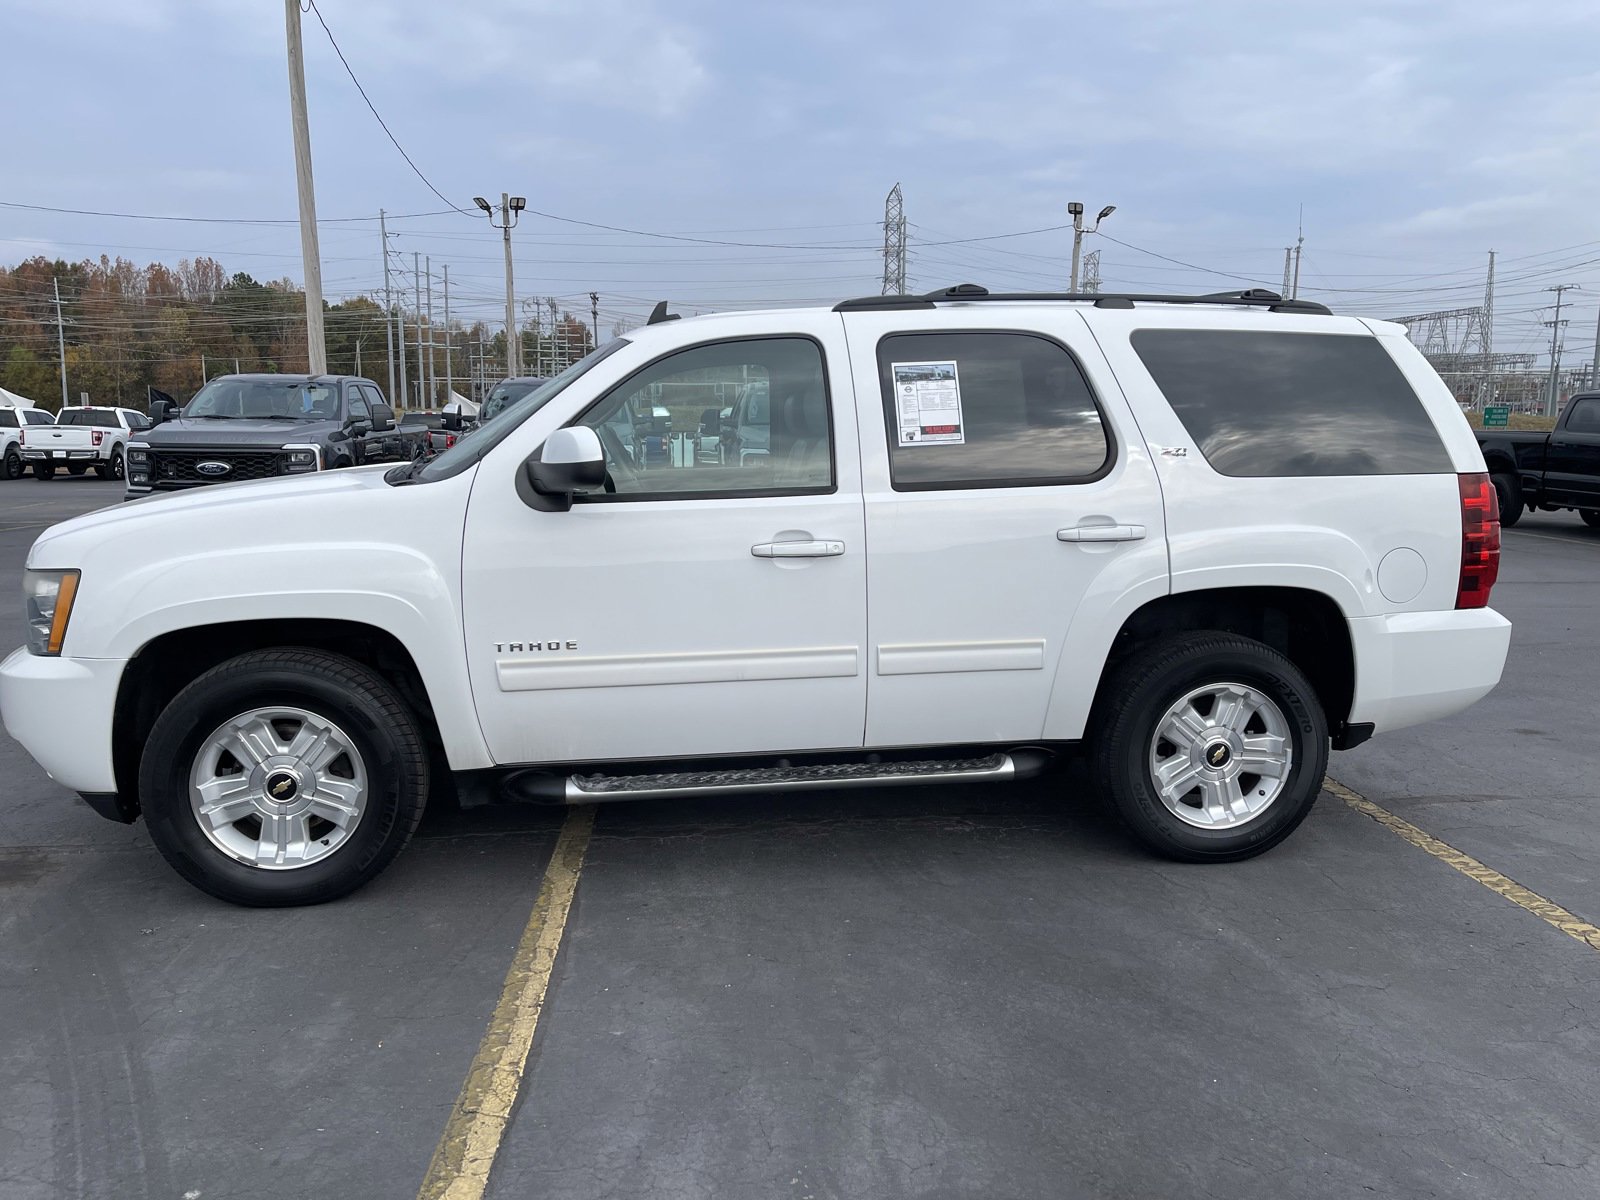 Used 2012 Chevrolet Tahoe LT with VIN 1GNSKBE05CR137871 for sale in Cullman, AL